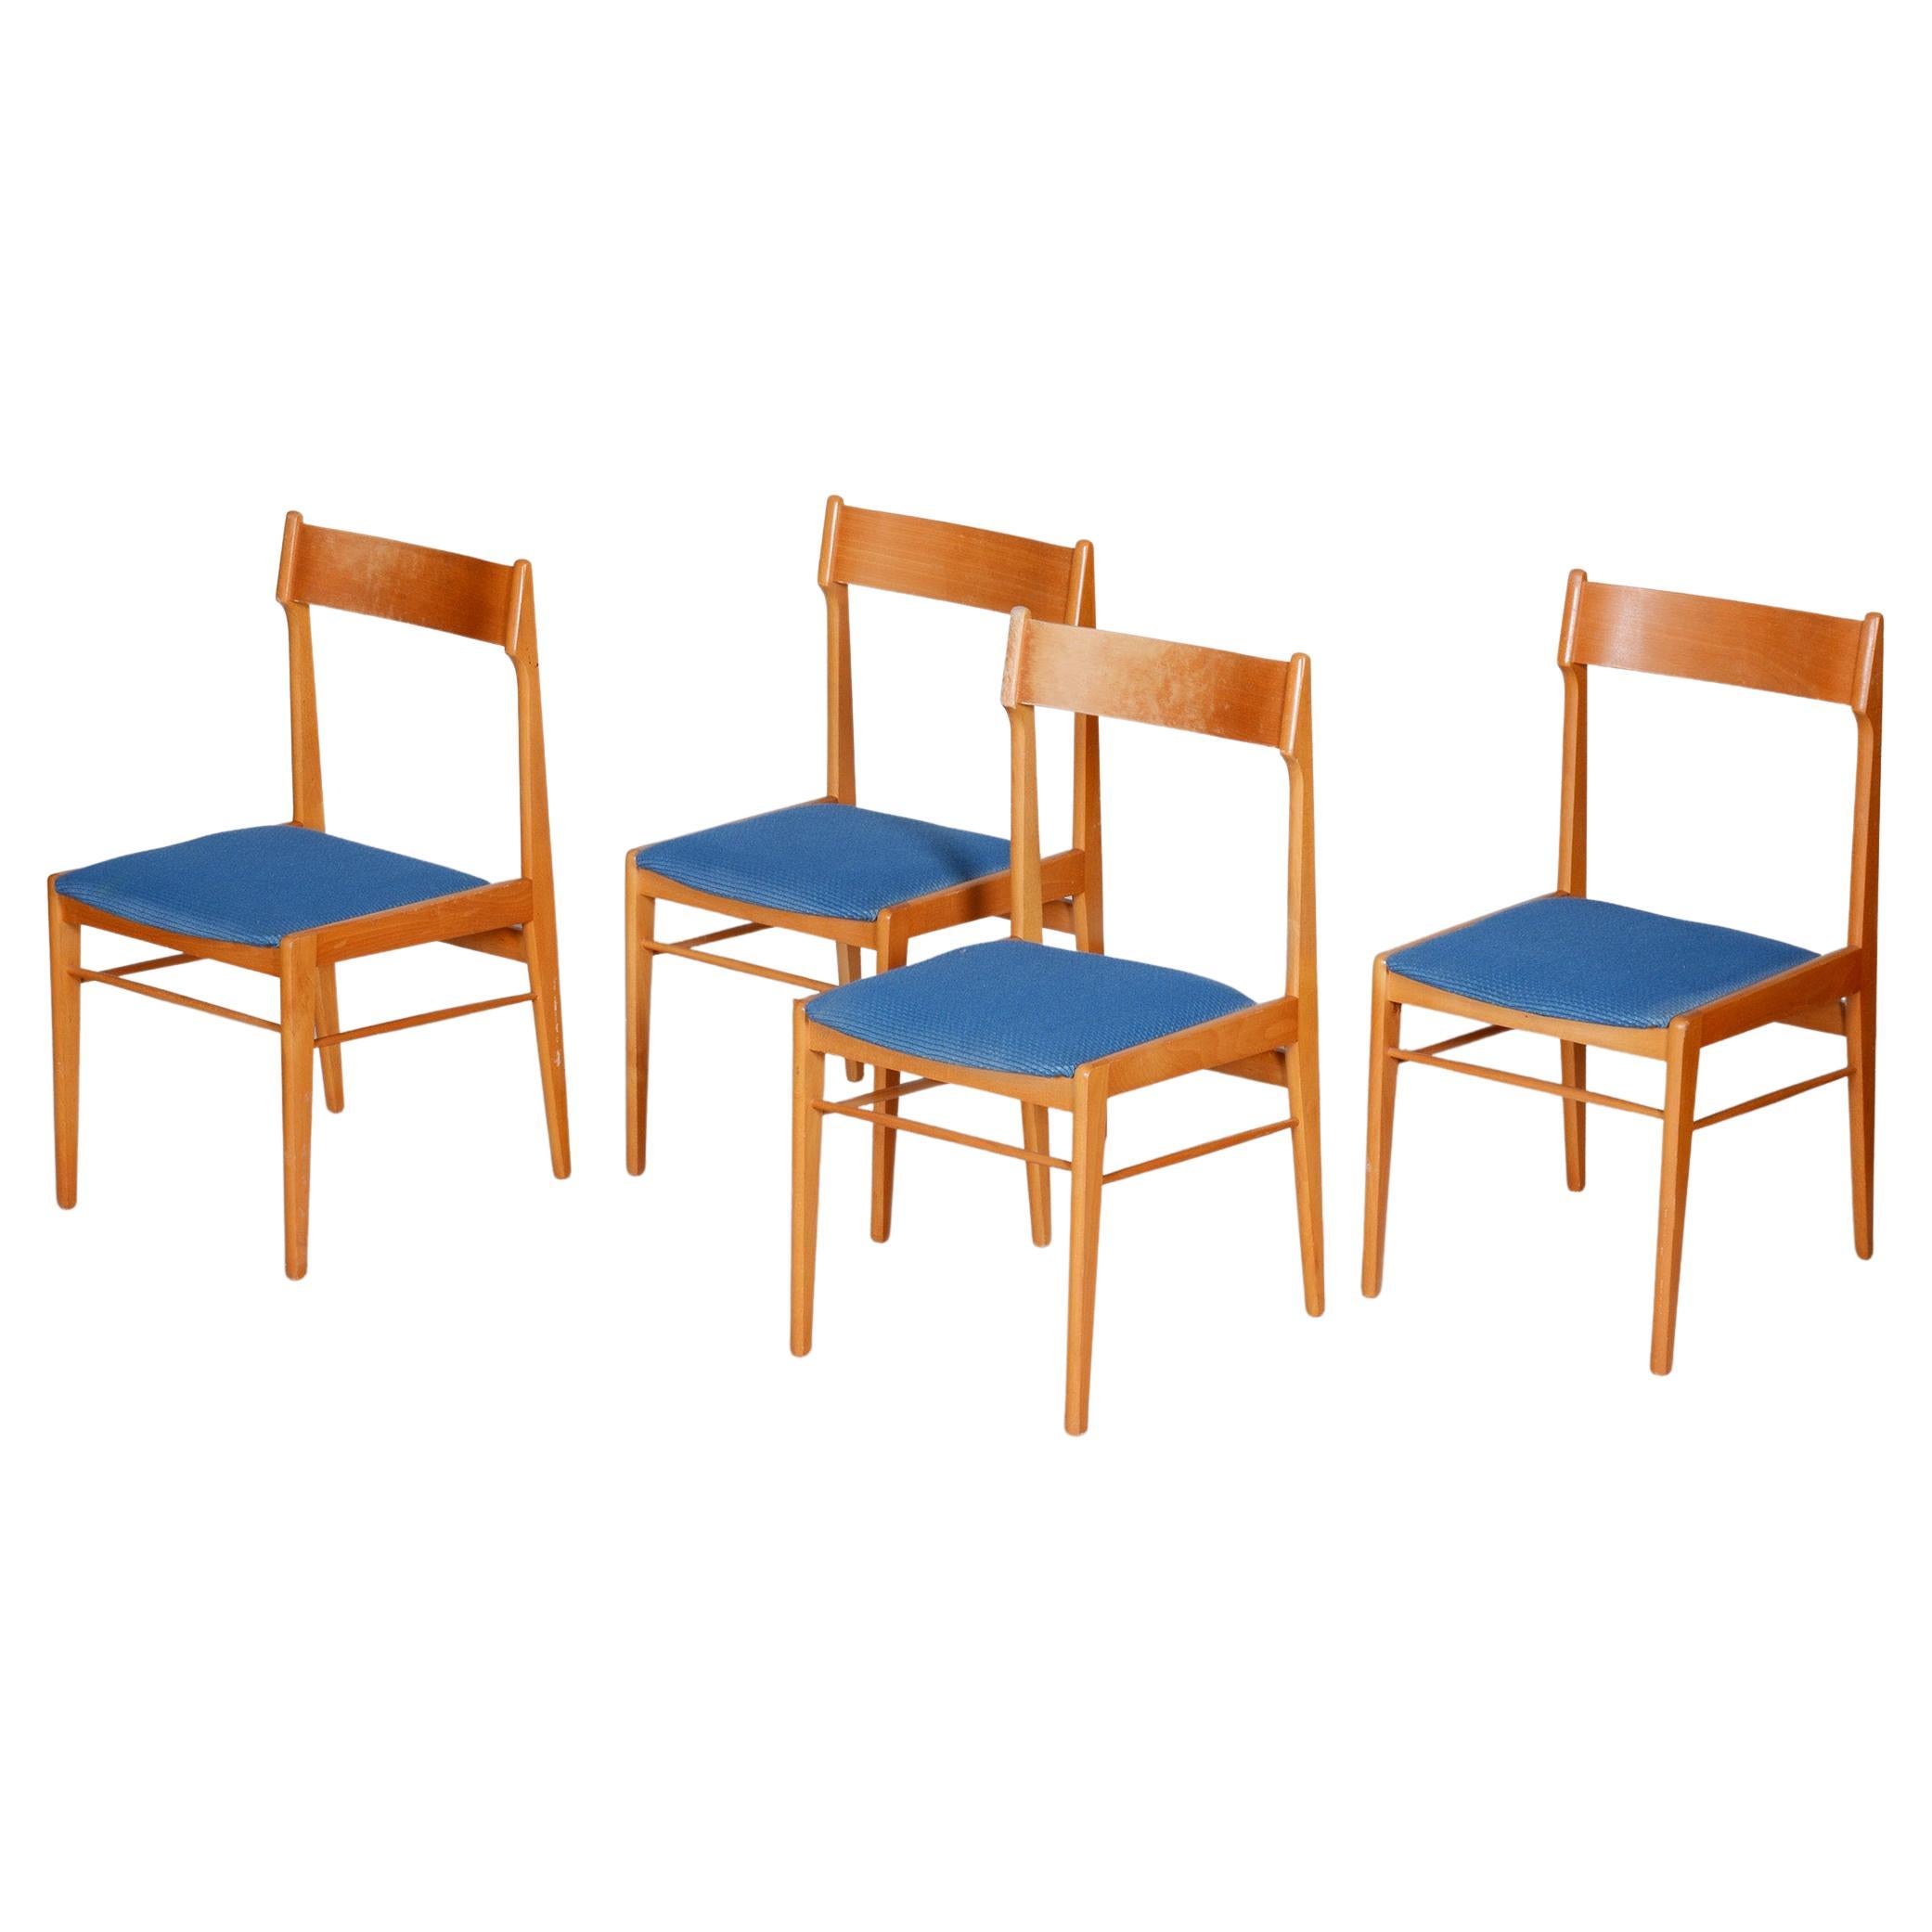 Blue and Brown Dining Chairs 4 Pcs, Well Preserved Original Condition, 1950s For Sale